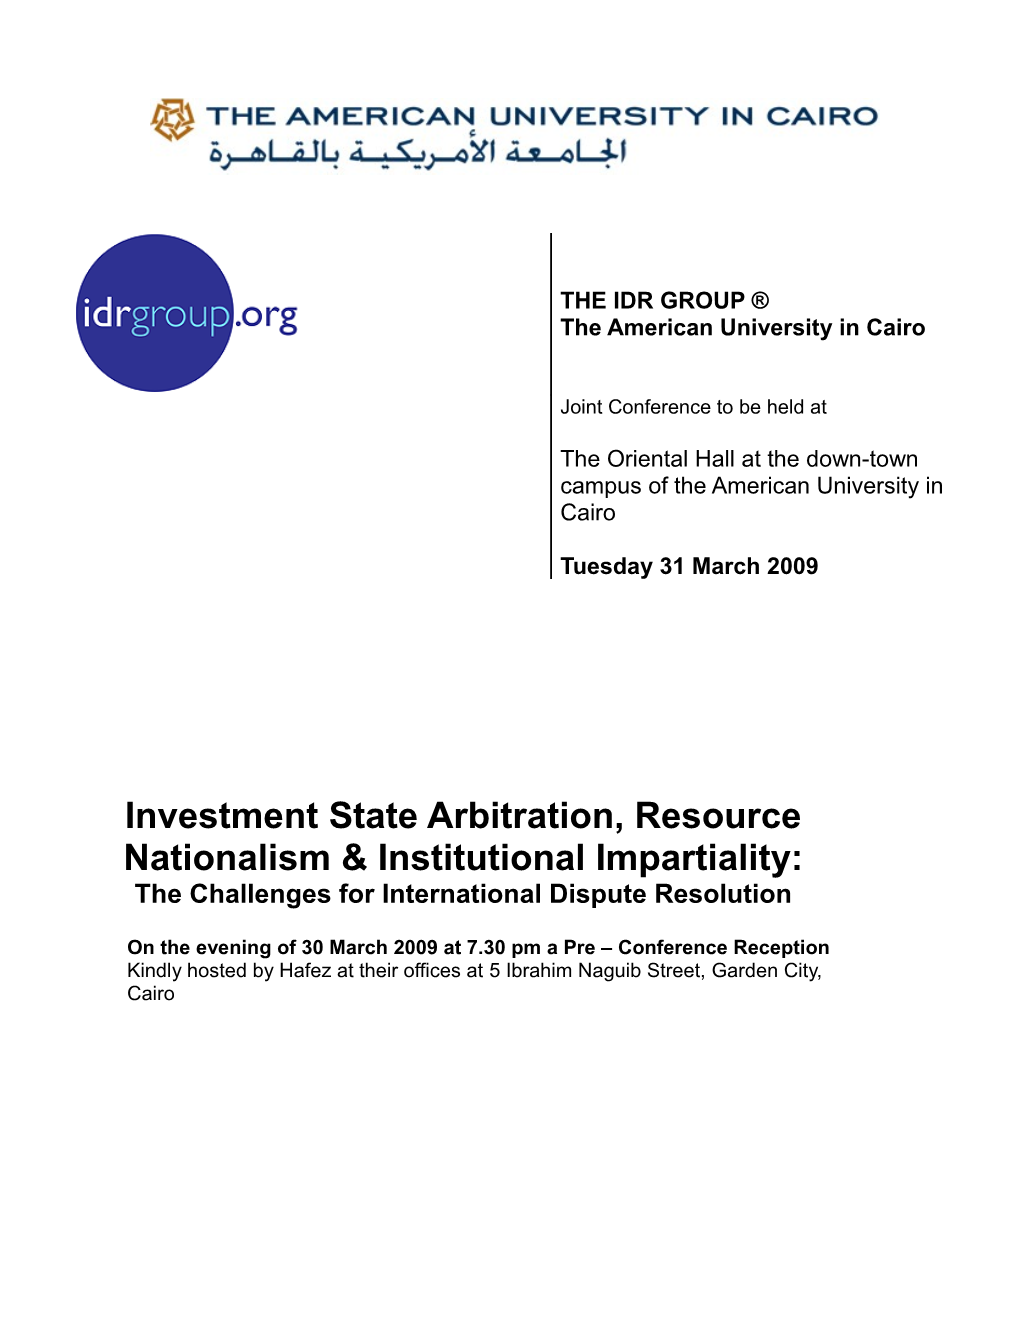 Investment State Arbitration, Resource Nationalism & Institutional Impartiality